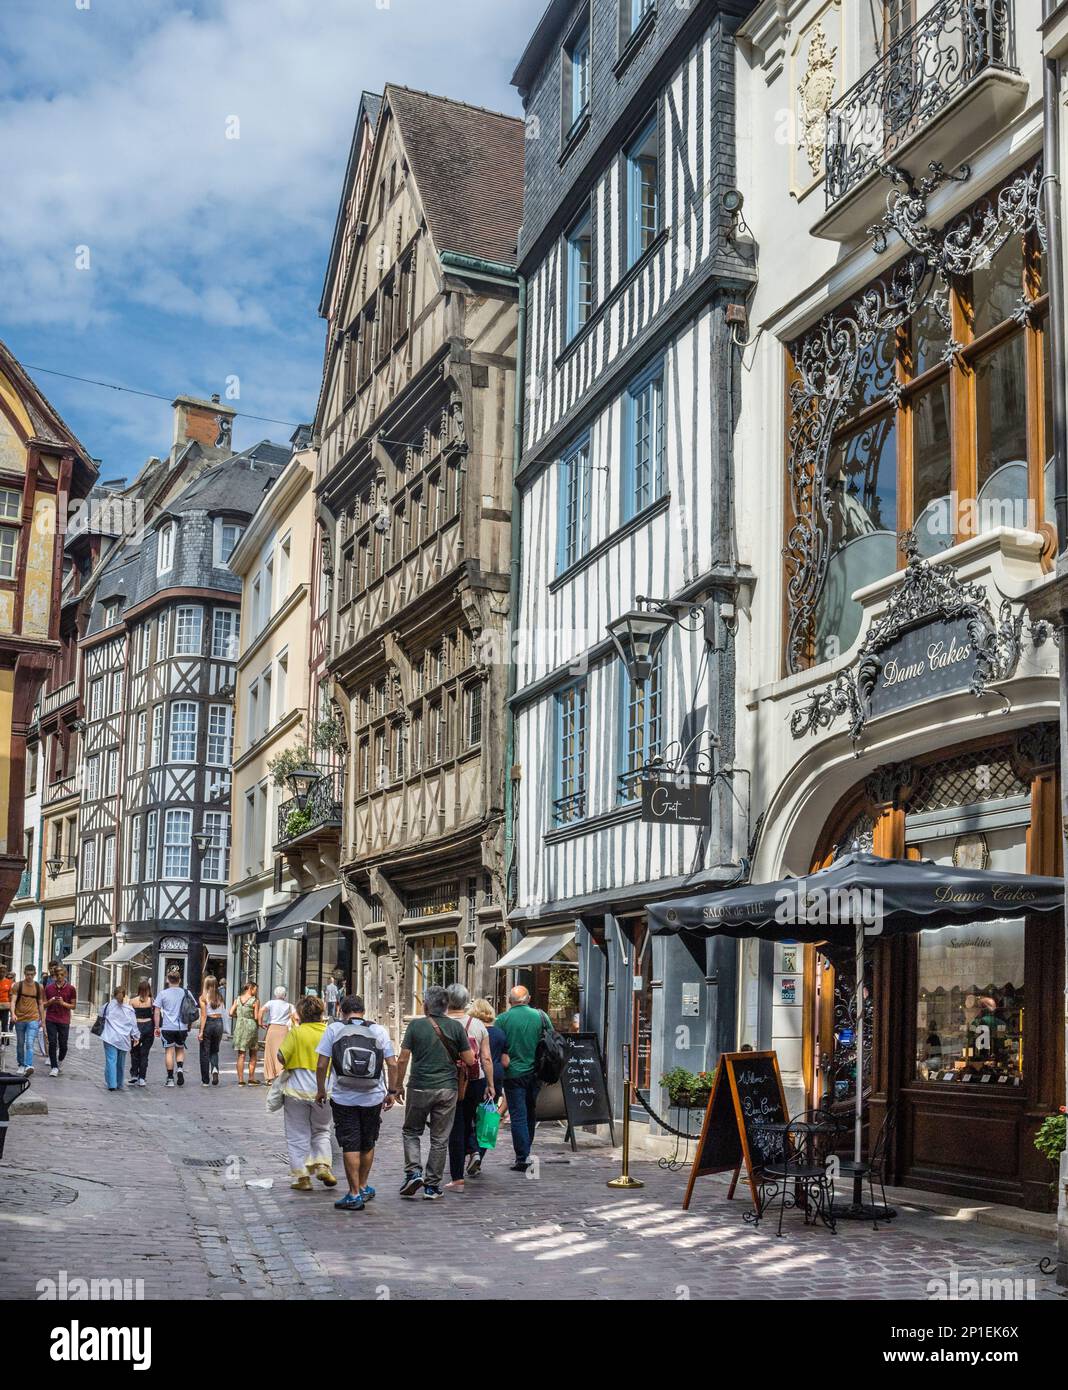 historic buildings lining the narrow, cobblestone paved Rue Saint-Romain in the medieval centre of Rouen, Normandy, France Stock Photo